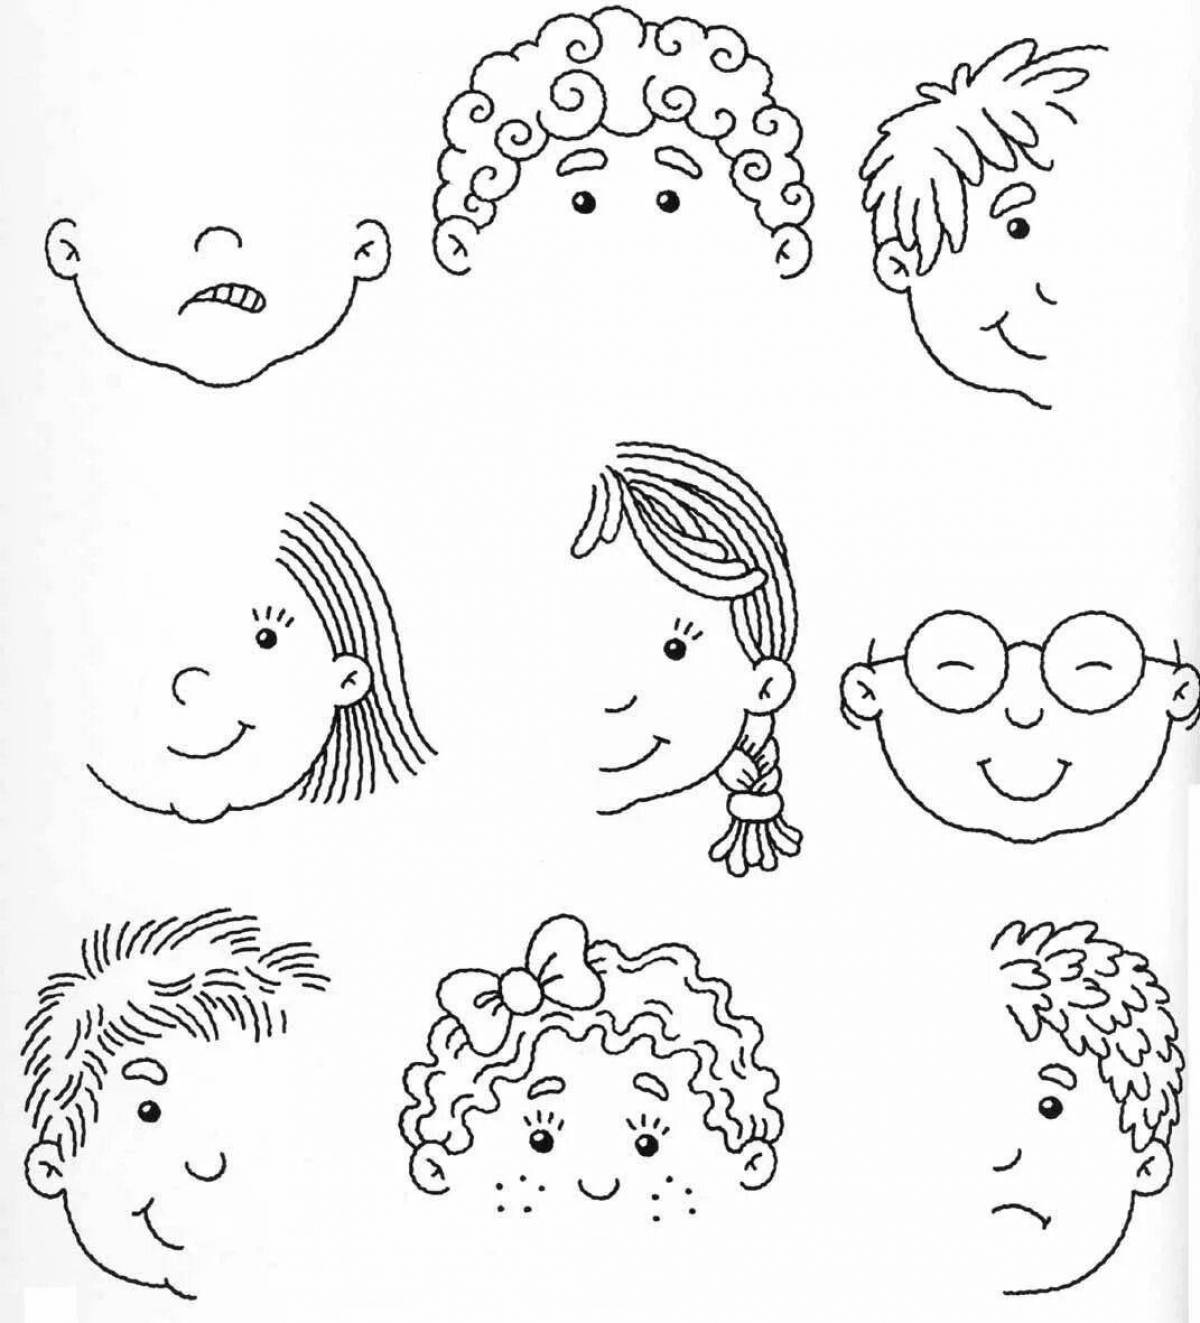 Fun emotion coloring pages for preschoolers